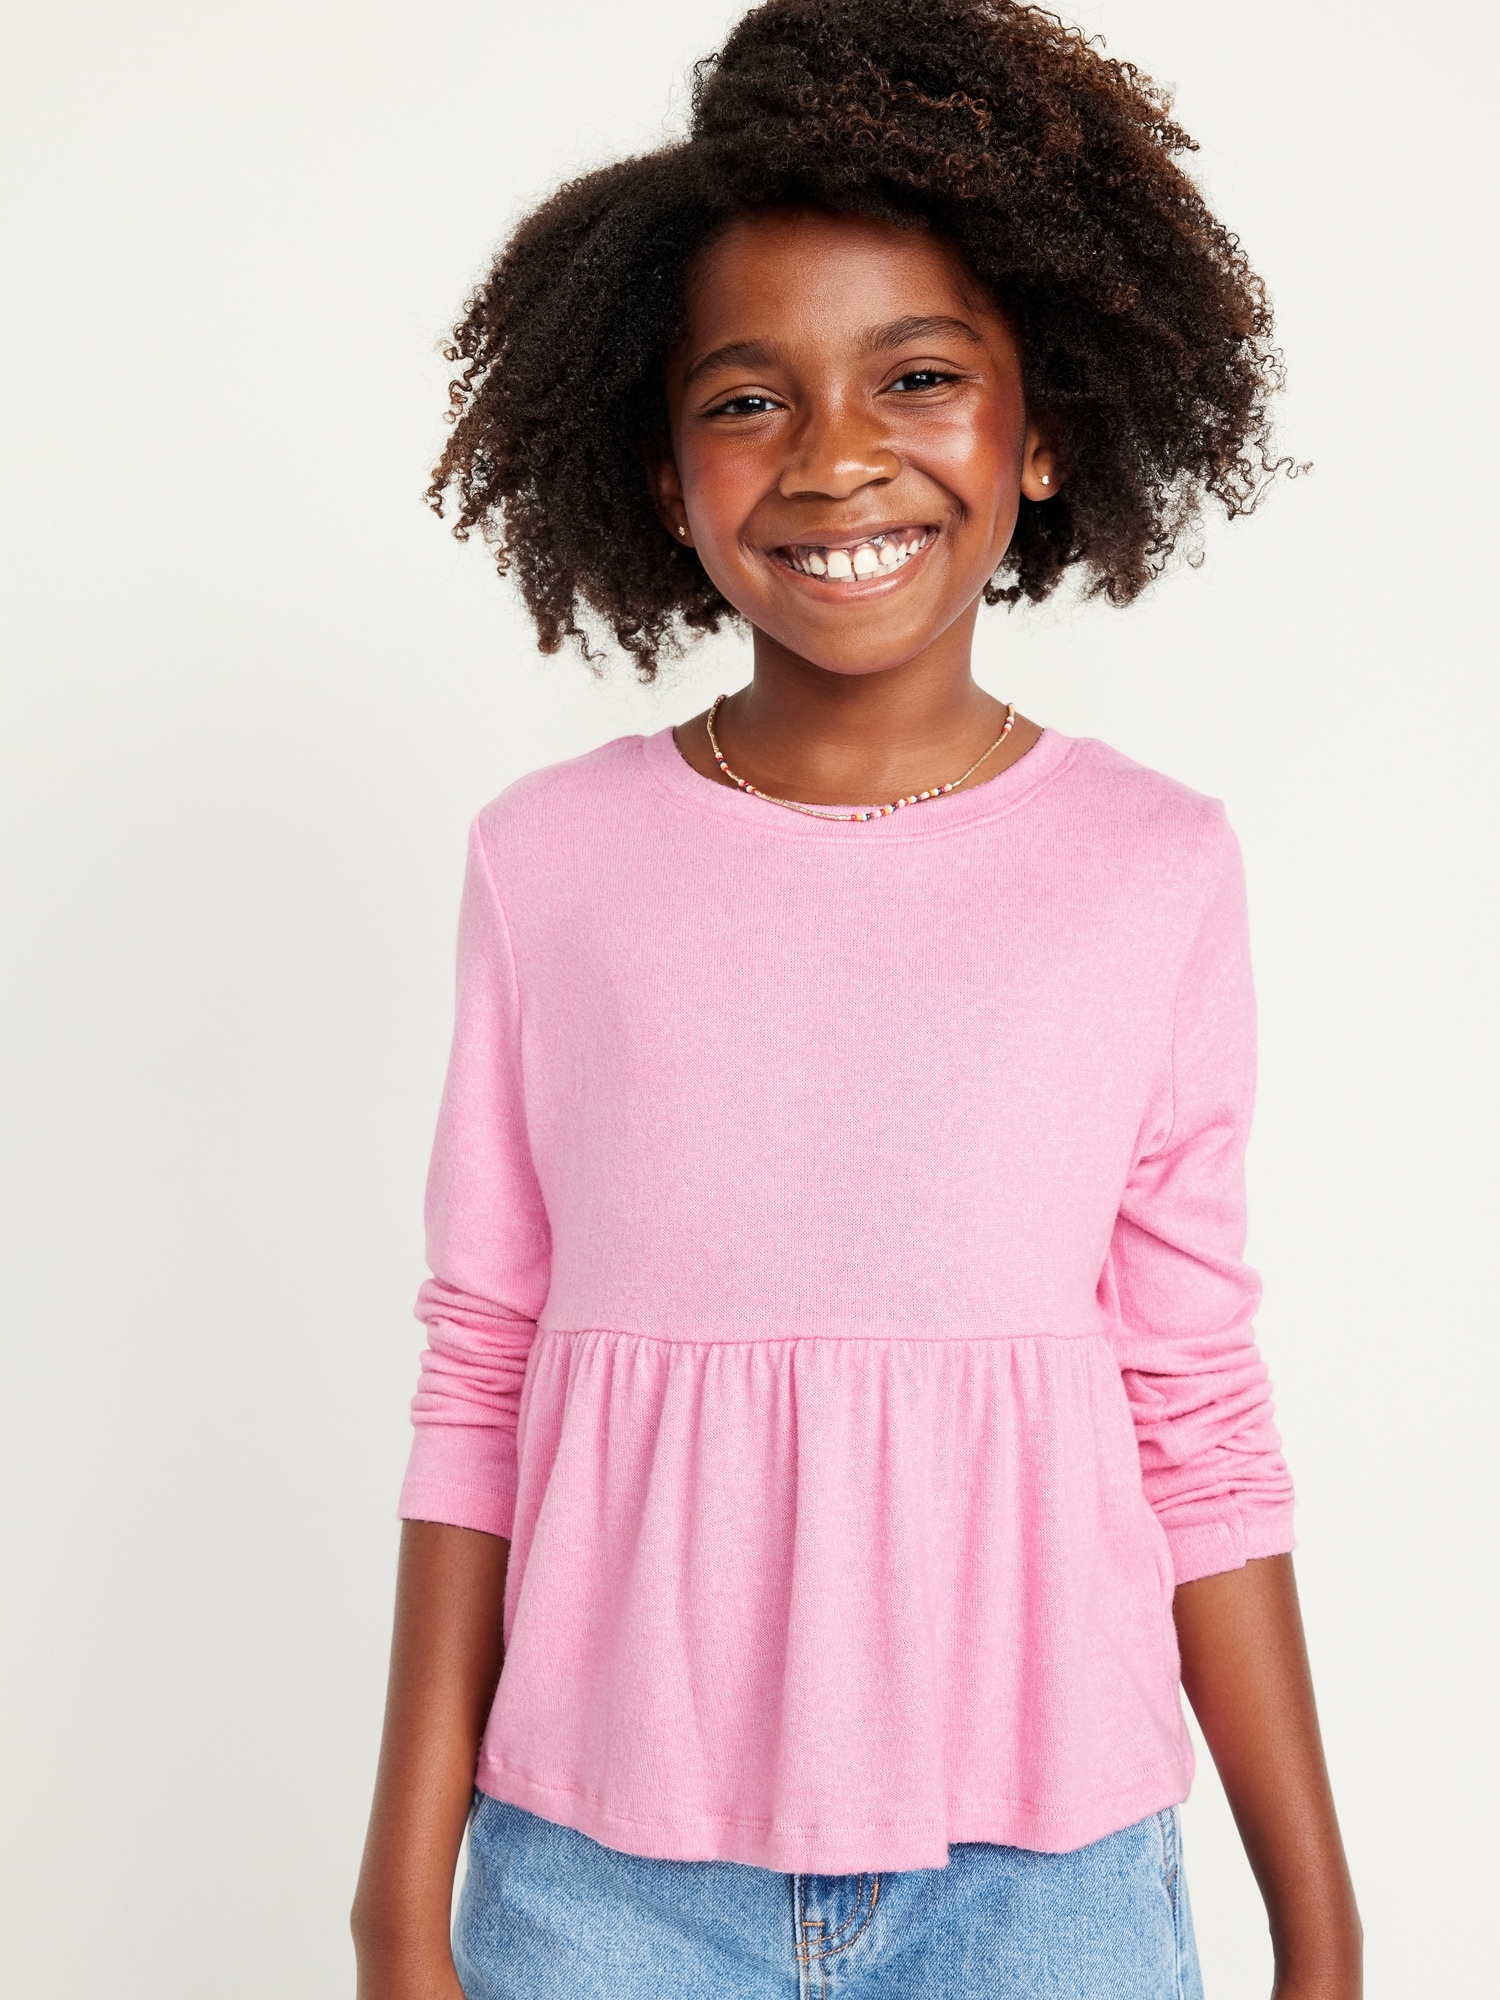 Cozy-Knit Peplum Top for Girls | Old Navy